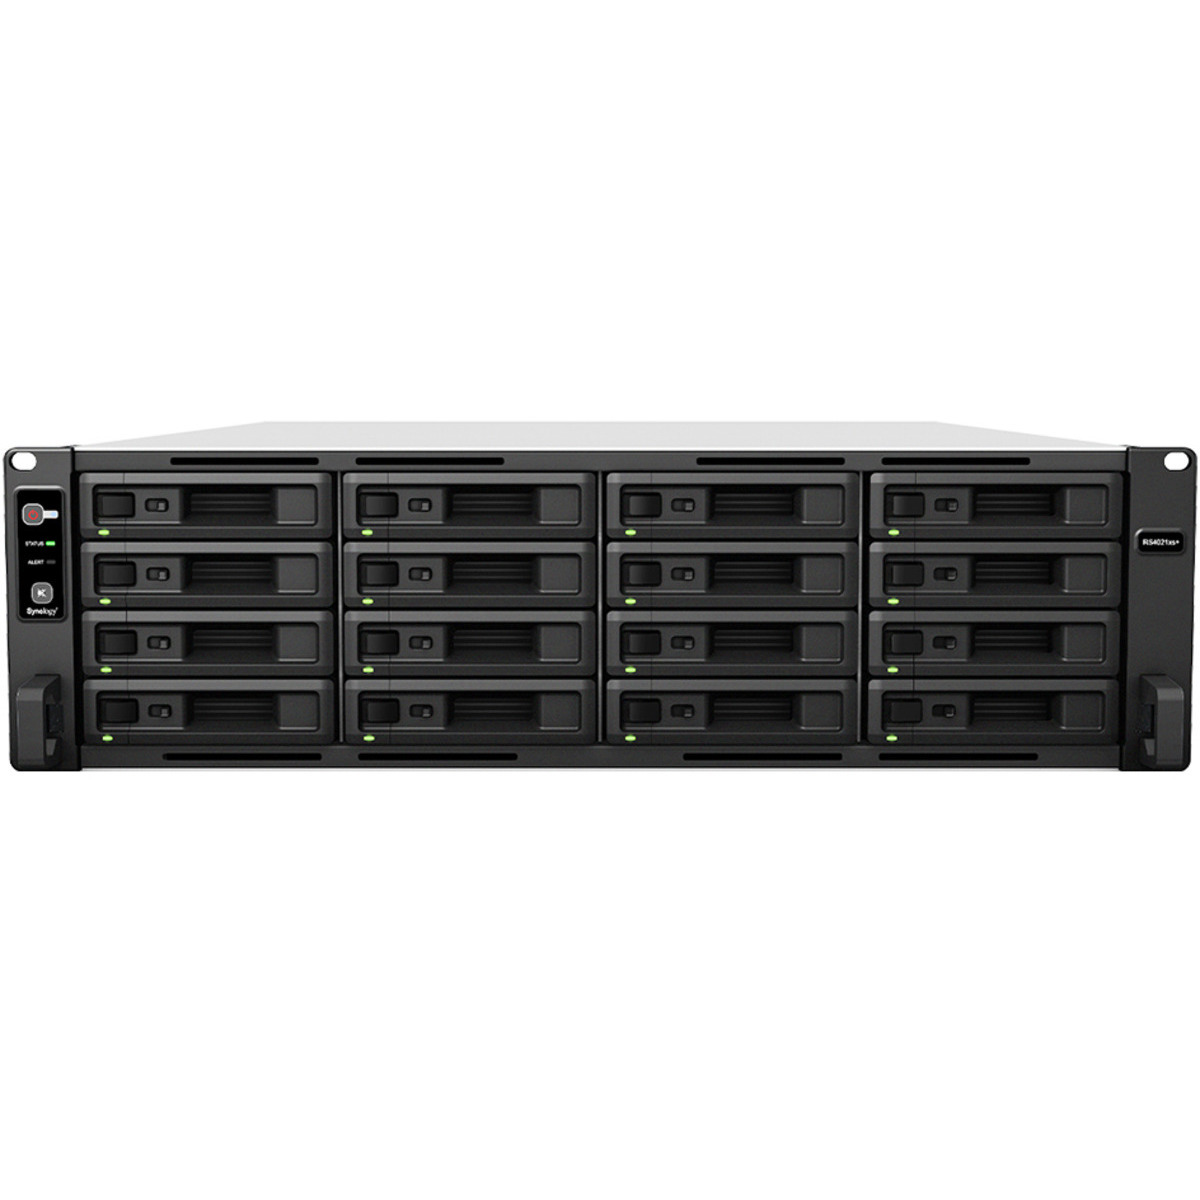 Synology RackStation RS4021xs+ 234tb 16-Bay RackMount Large Business / Enterprise NAS - Network Attached Storage Device 13x18tb Toshiba Enterprise Capacity MG09ACA18TE 3.5 7200rpm SATA 6Gb/s HDD ENTERPRISE Class Drives Installed - Burn-In Tested RackStation RS4021xs+